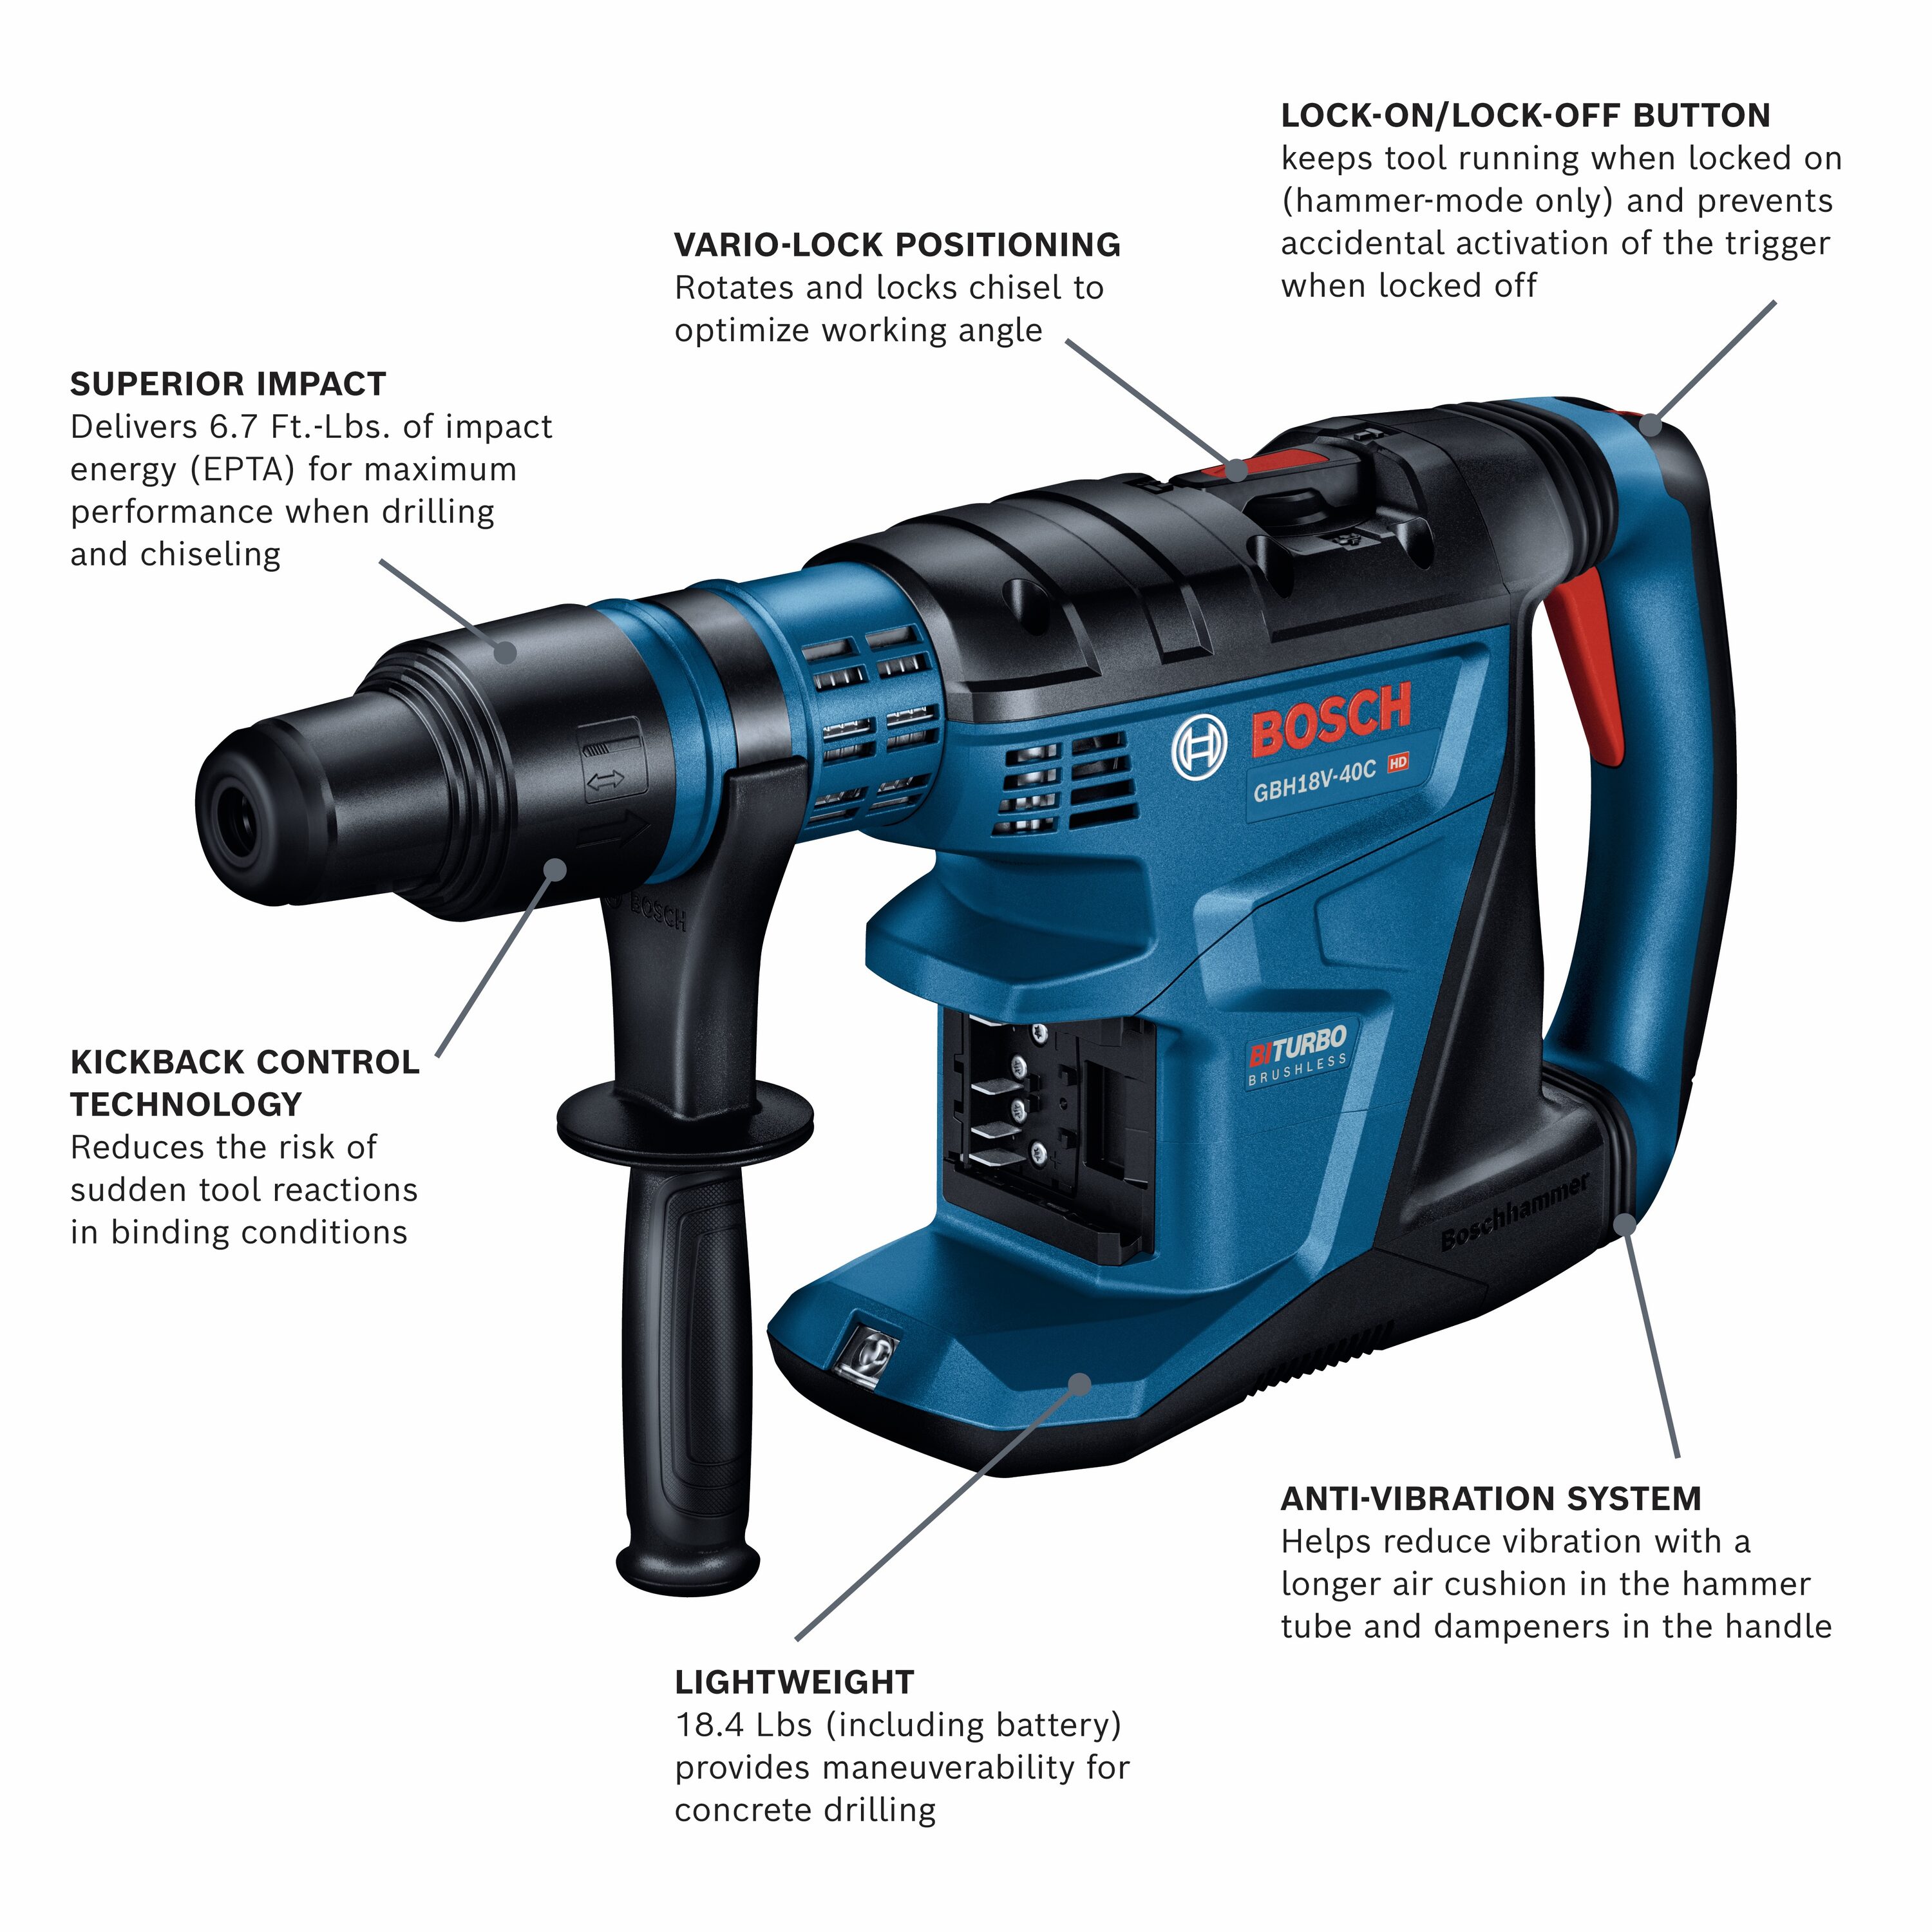 Bosch PROFACTOR 18-V 12 Amp-Hour; Lithium Battery in the Power